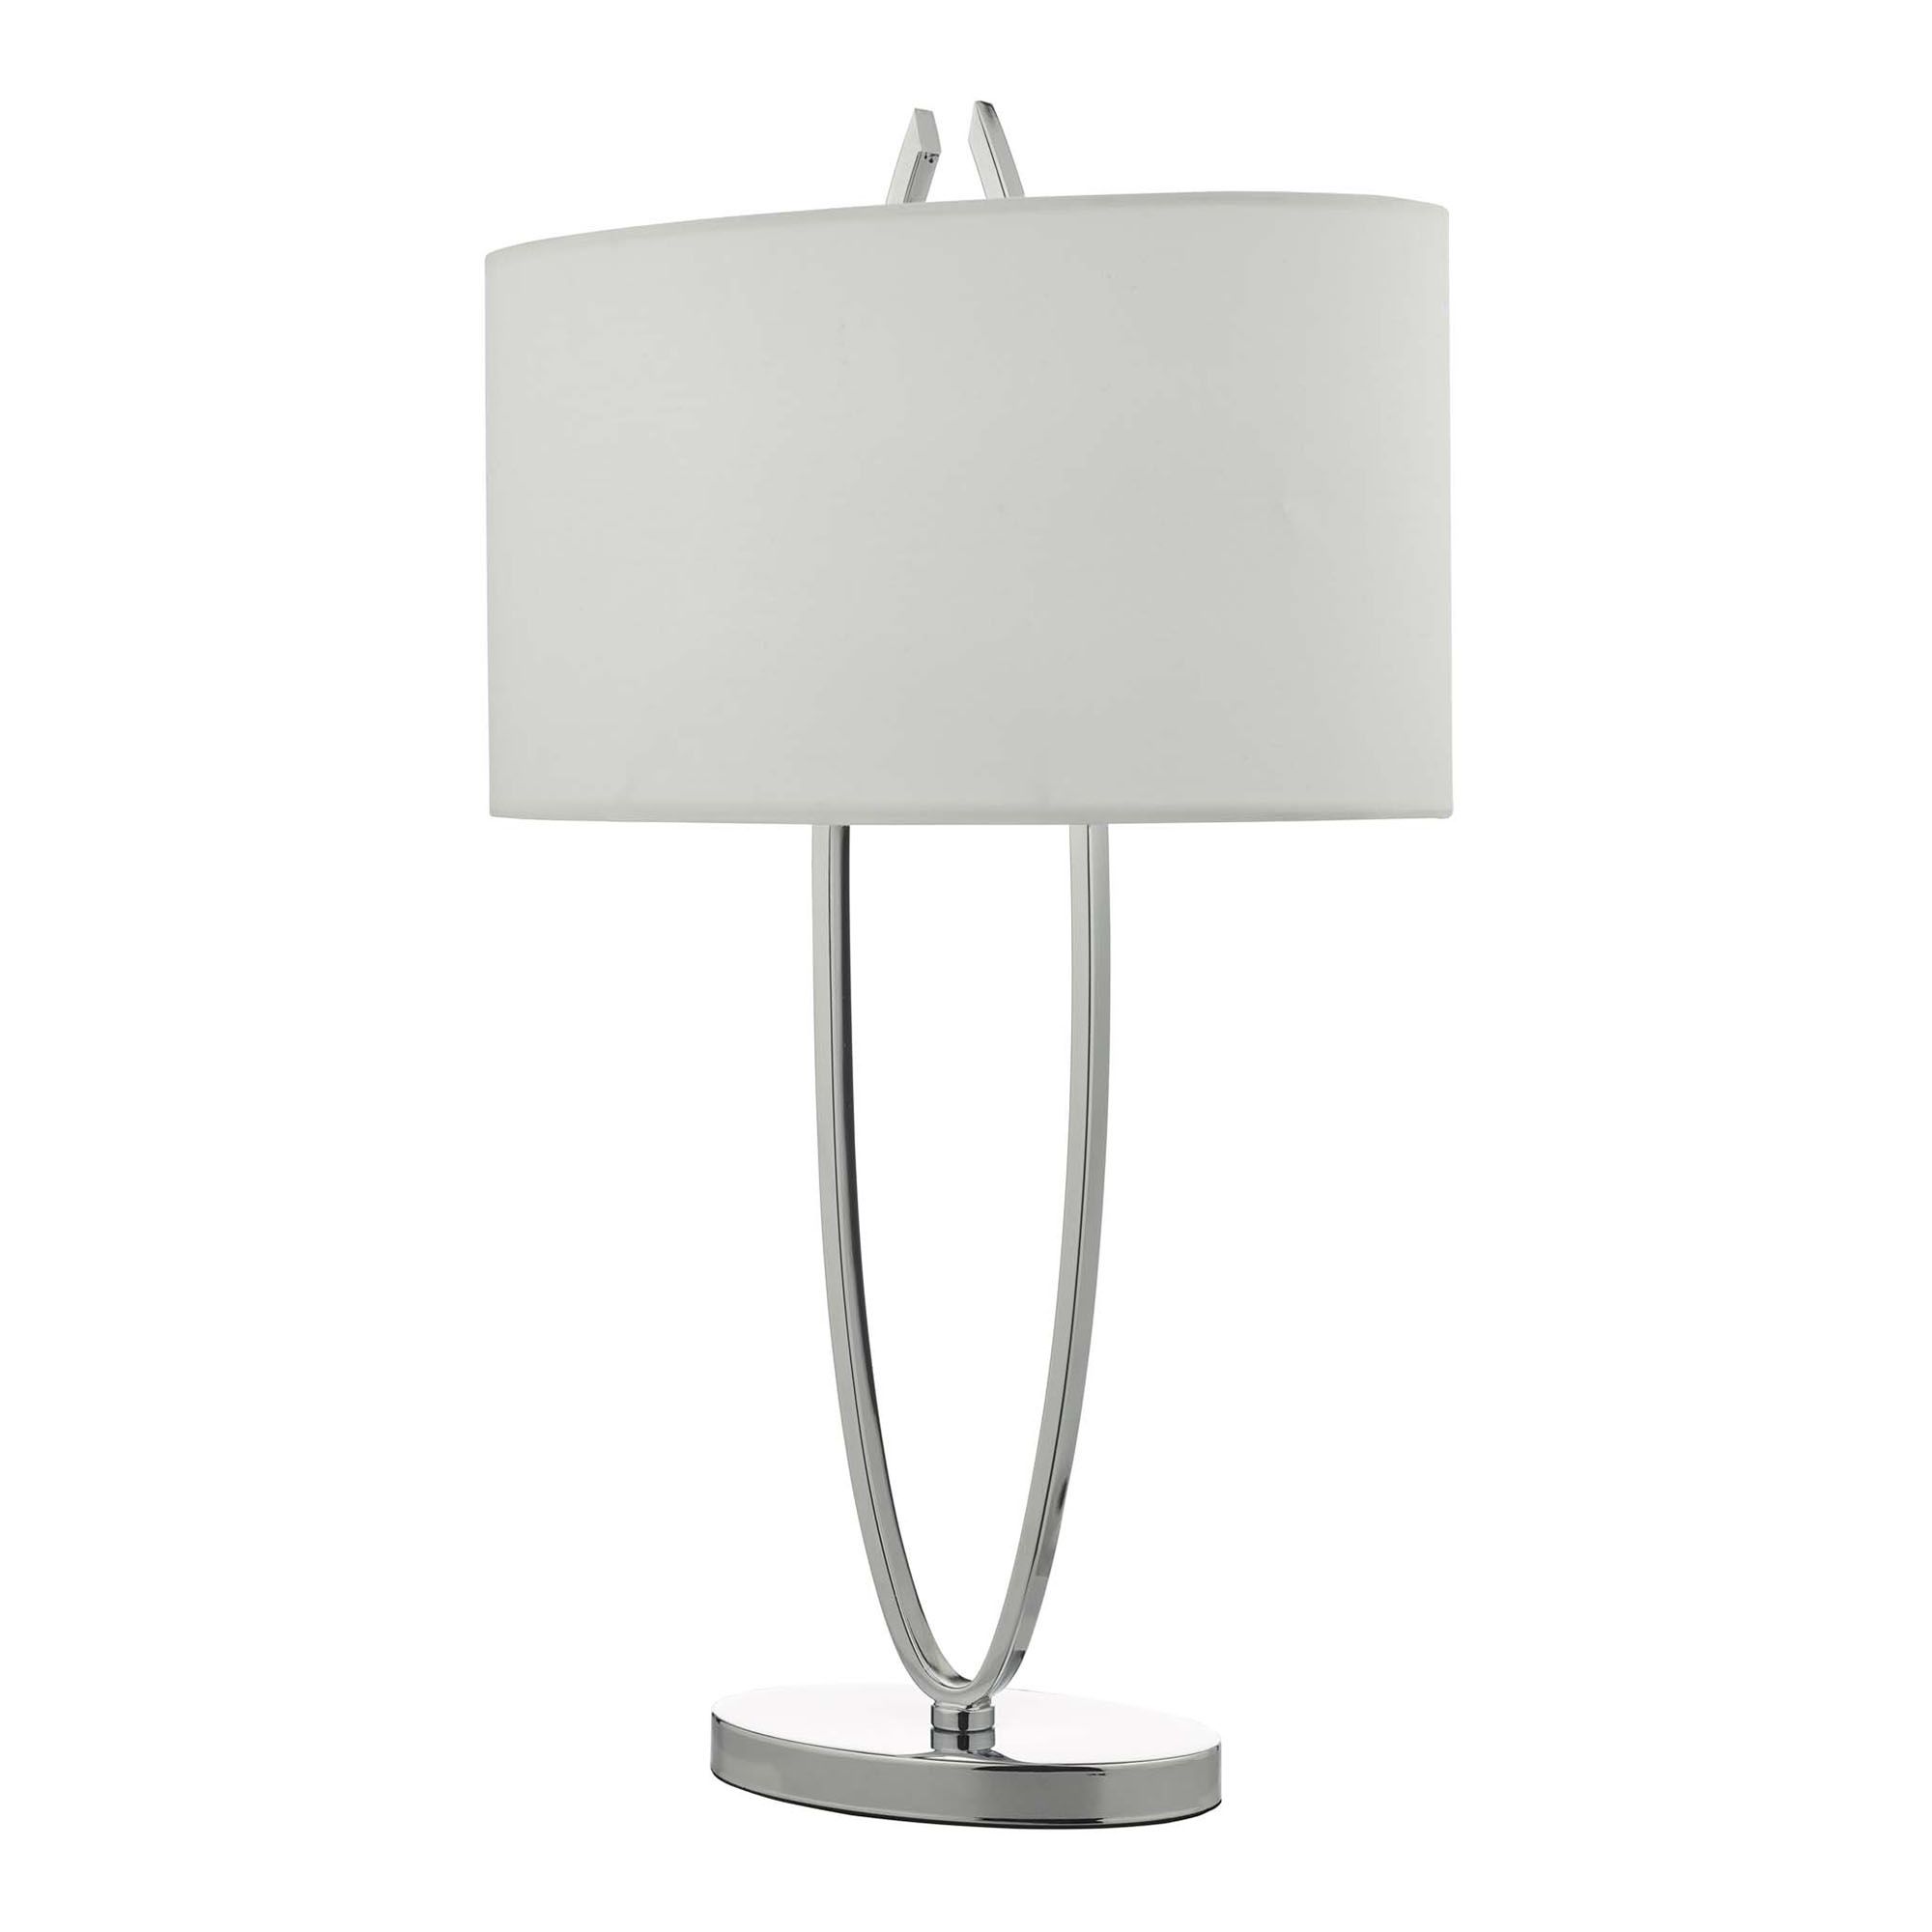 Utara Table Lamp Polished Chrome With Shade, Black And White Table Lamp Shades